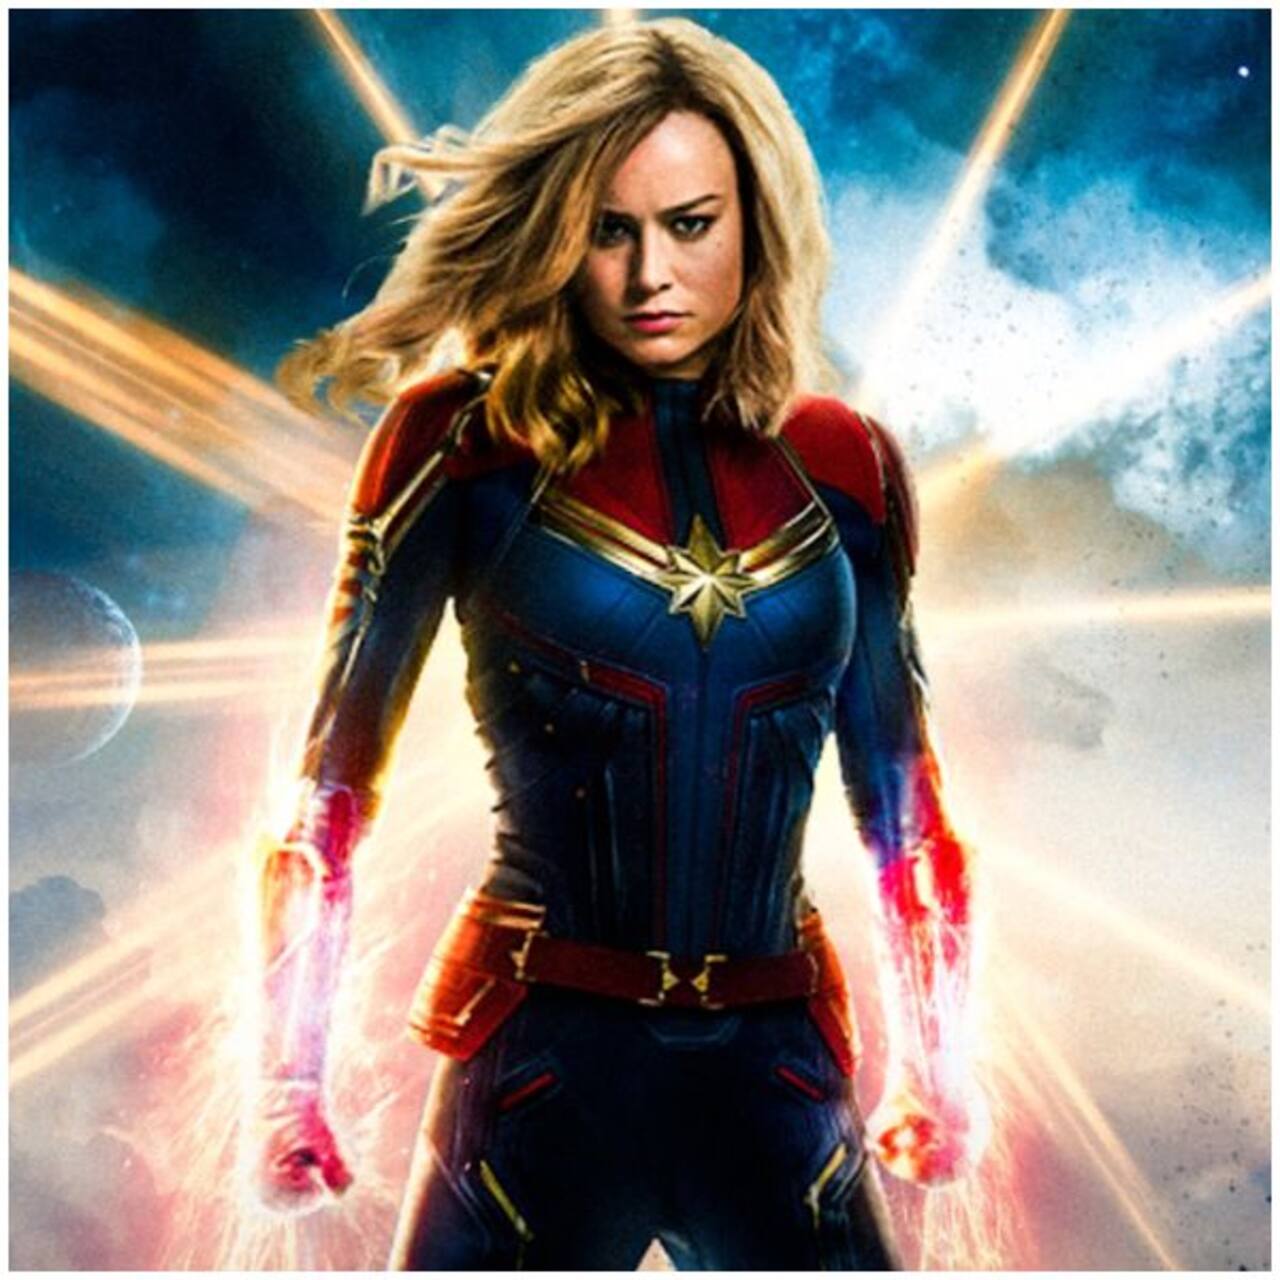 Captain Marvel box office predictions will make Iron Man, Doctor Strange,  Deadpool and Wonder Woman run for covers - Bollywood News & Gossip, Movie  Reviews, Trailers & Videos at 